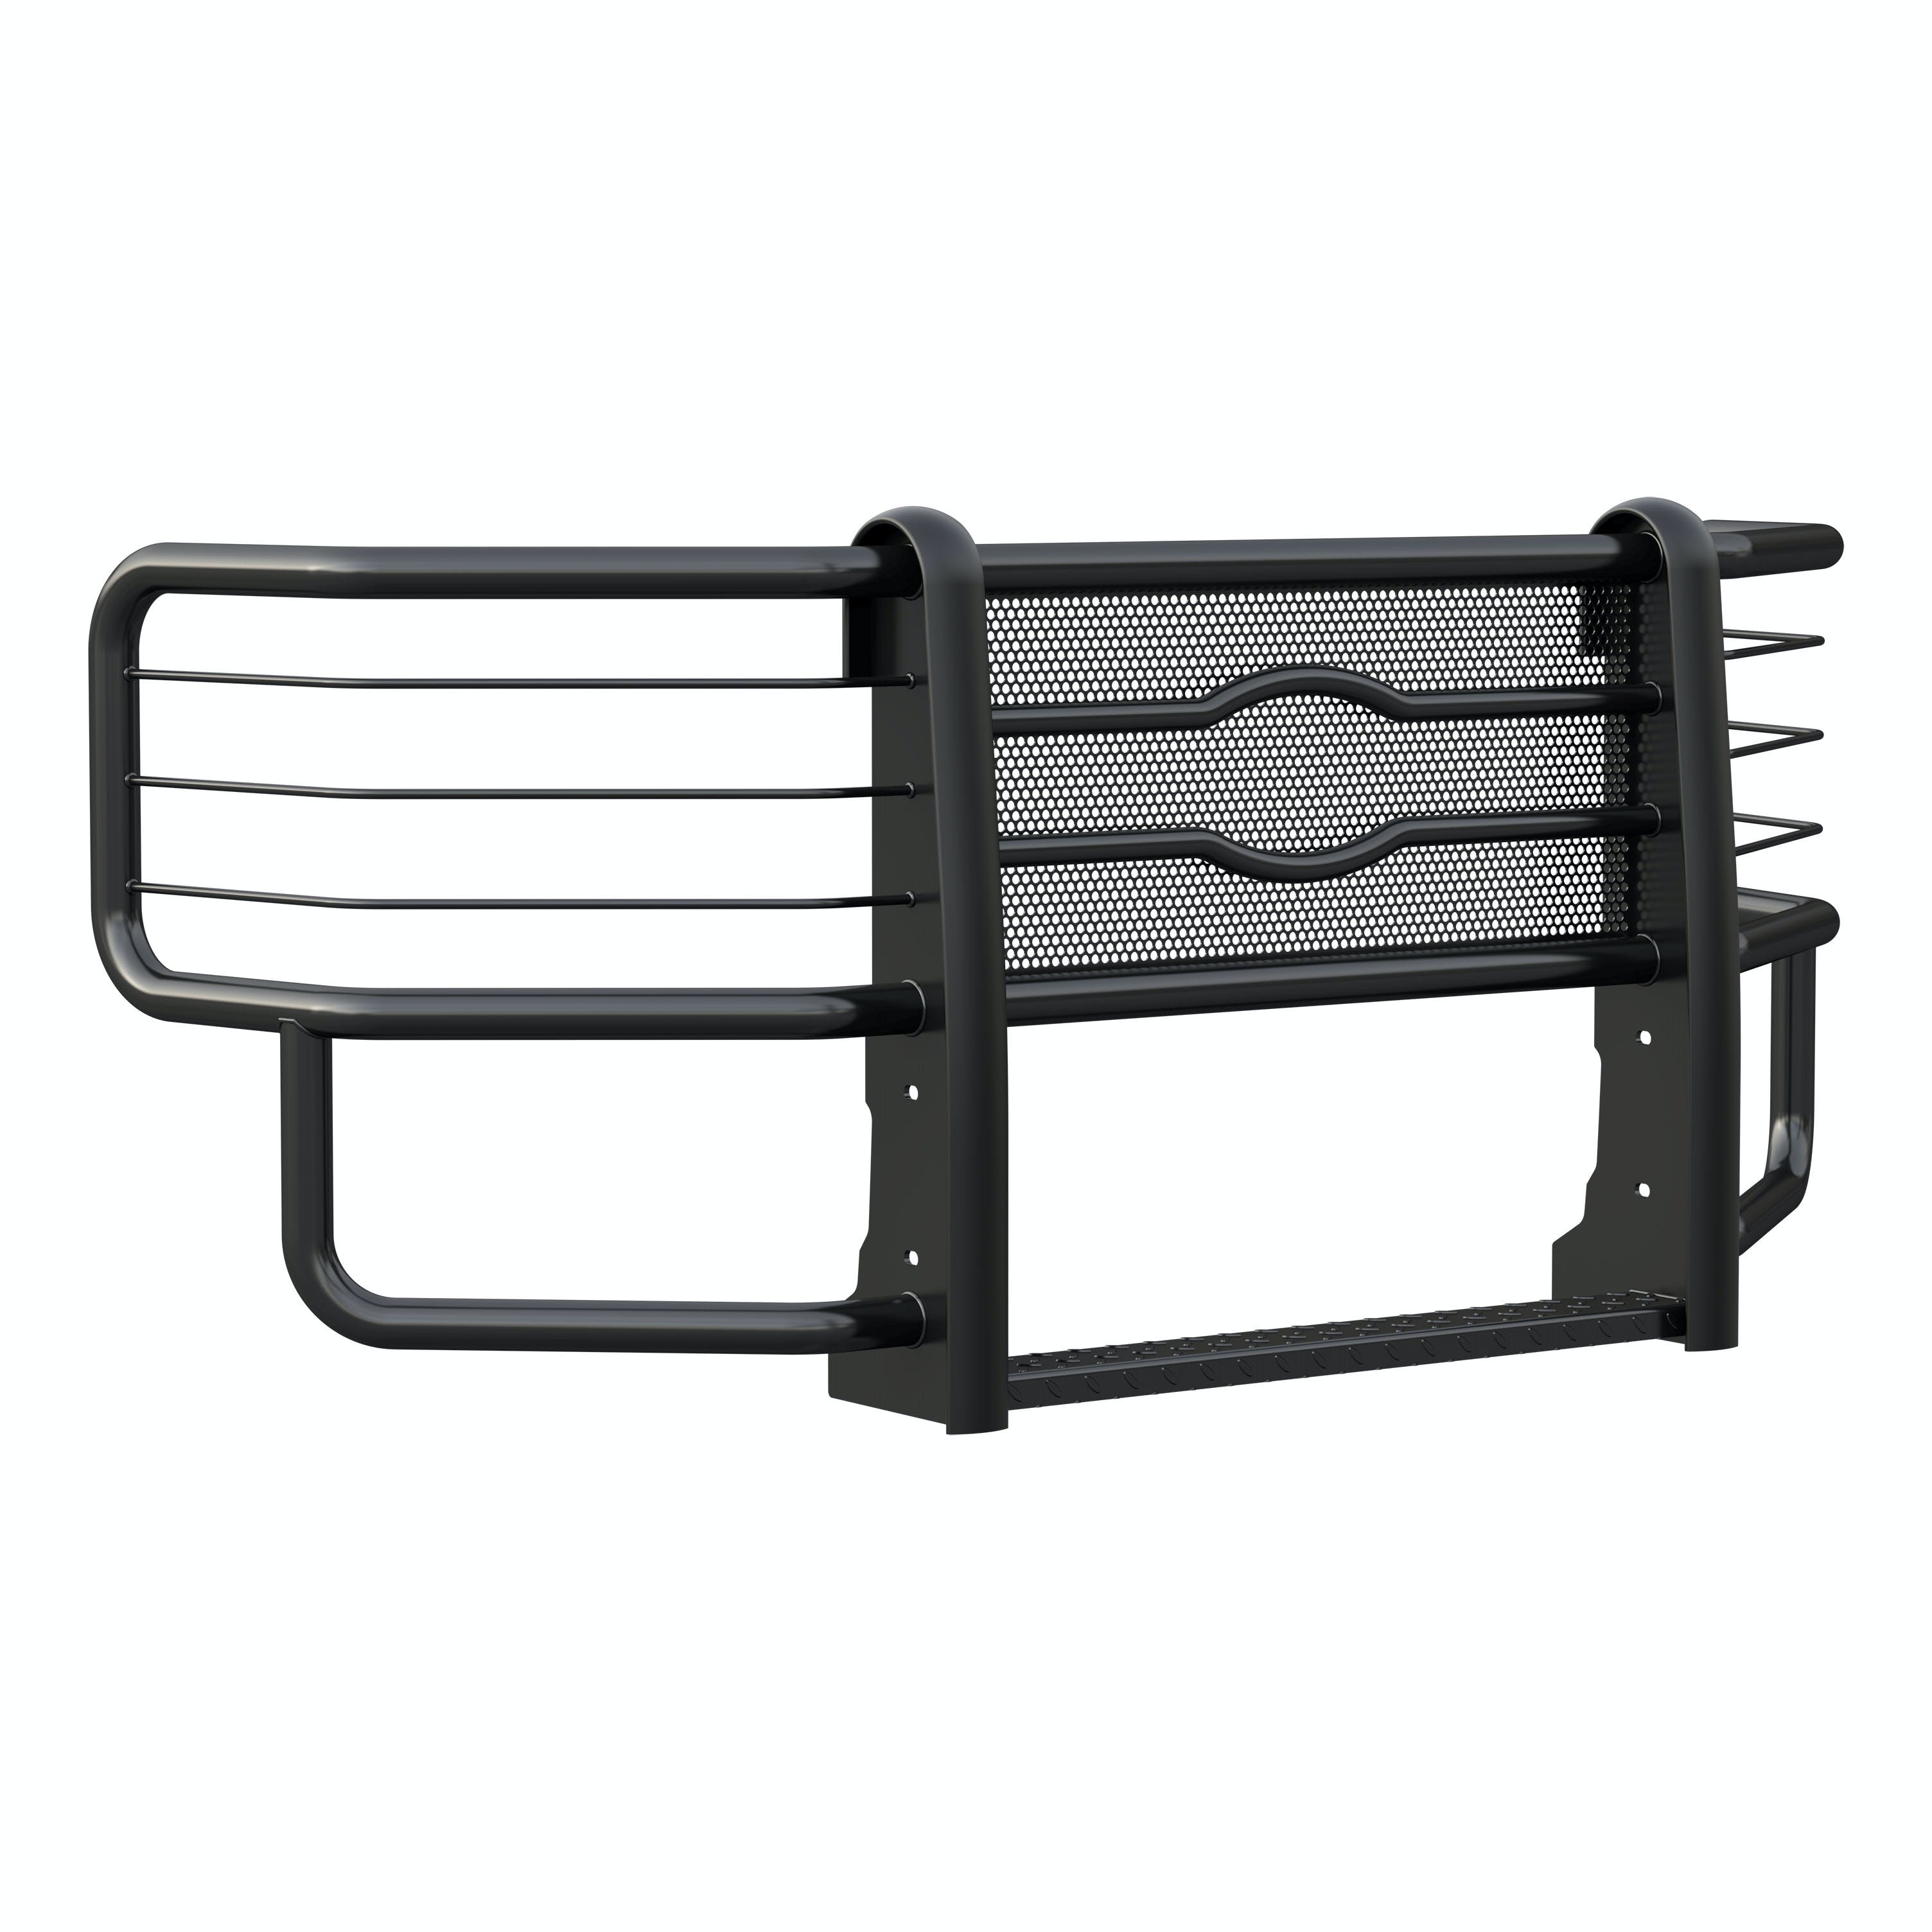 LUVERNE 321523-321520 Prowler Max Grille Guard